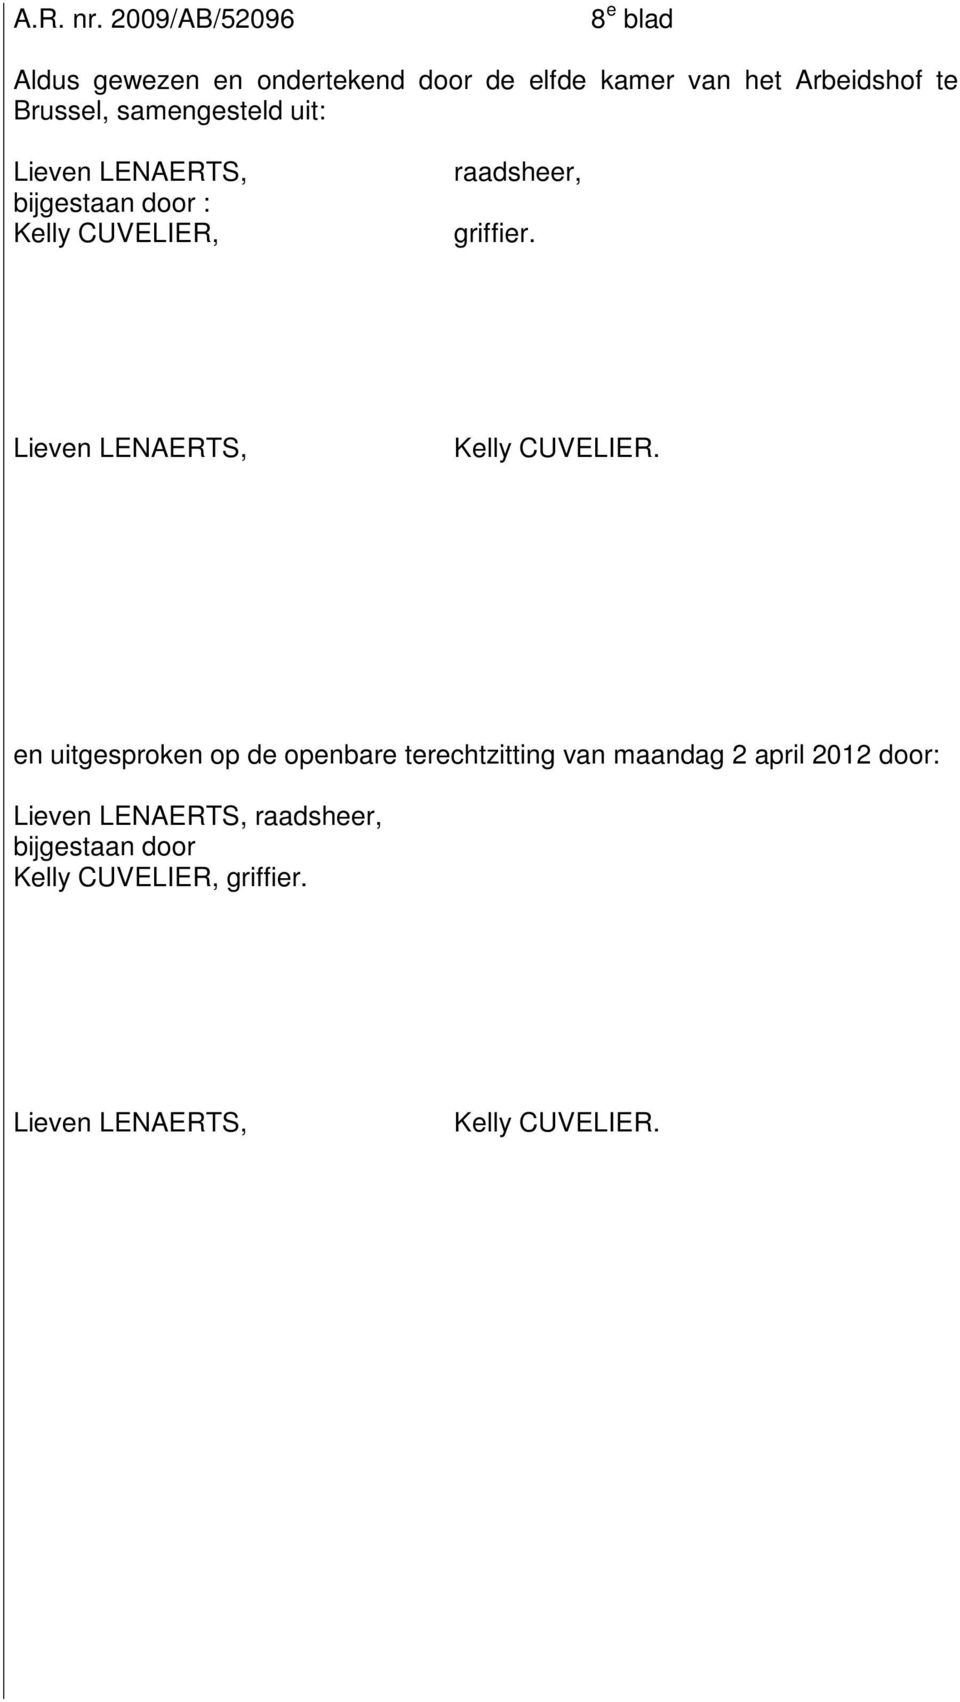 Lieven LENAERTS, Kelly CUVELIER.